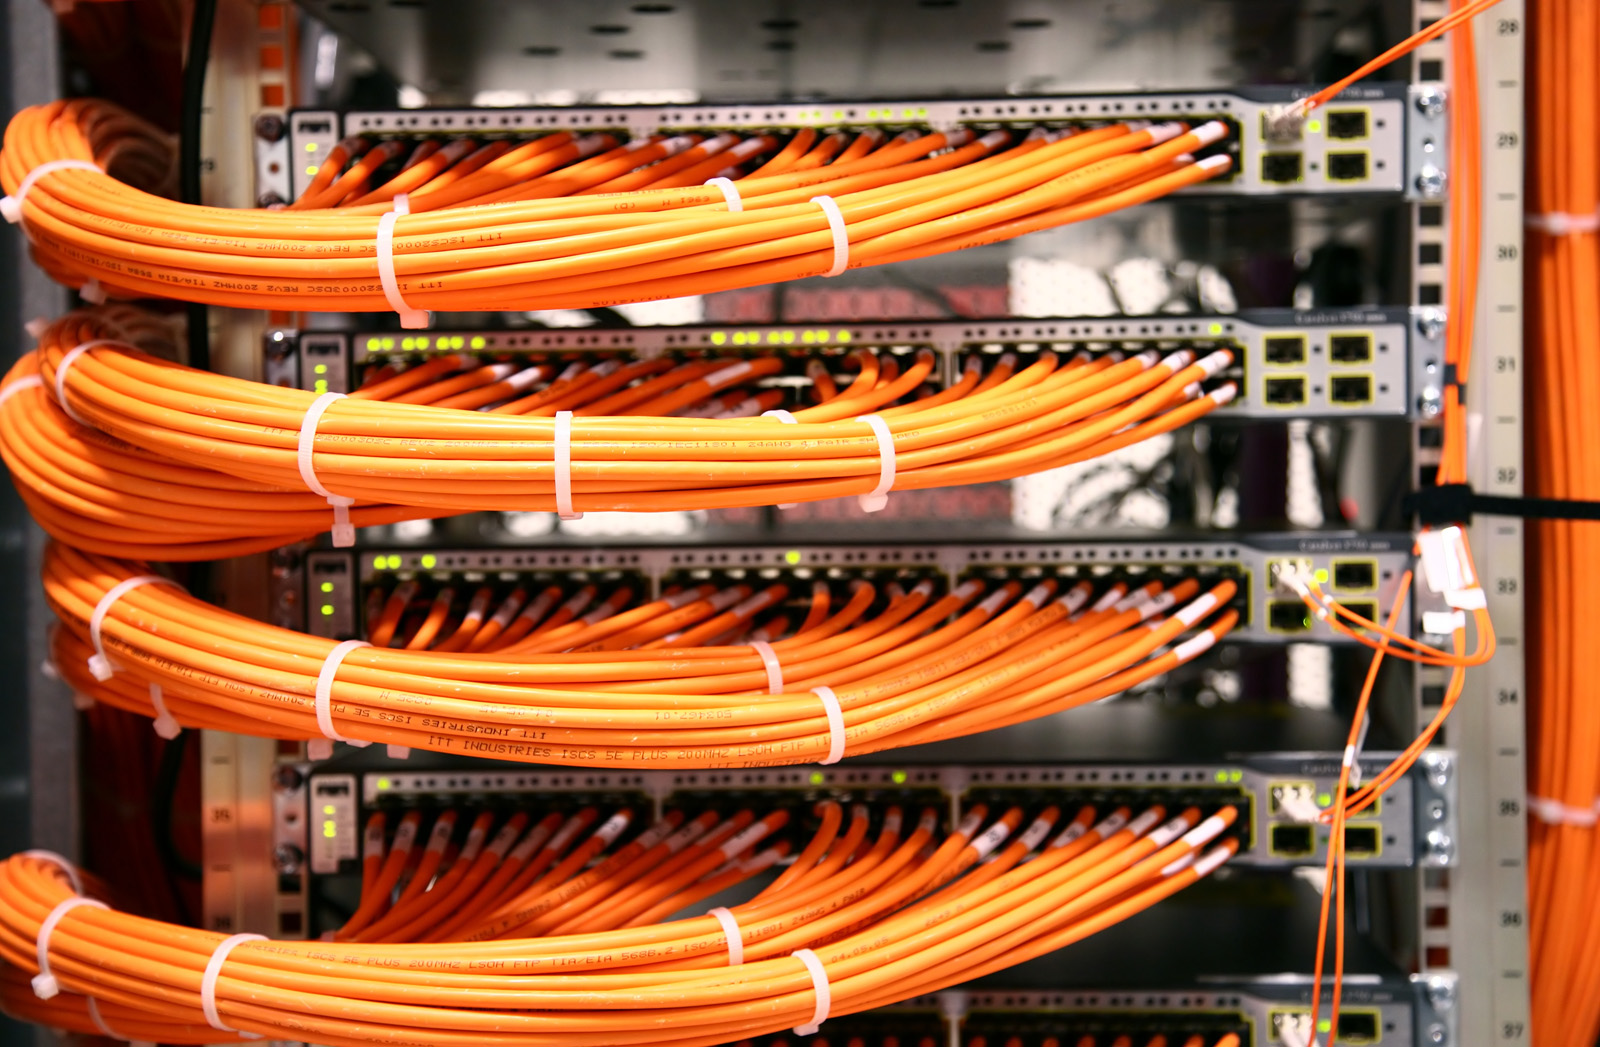 Franklin Kentucky High Quality Voice & Data Network Cabling Solutions